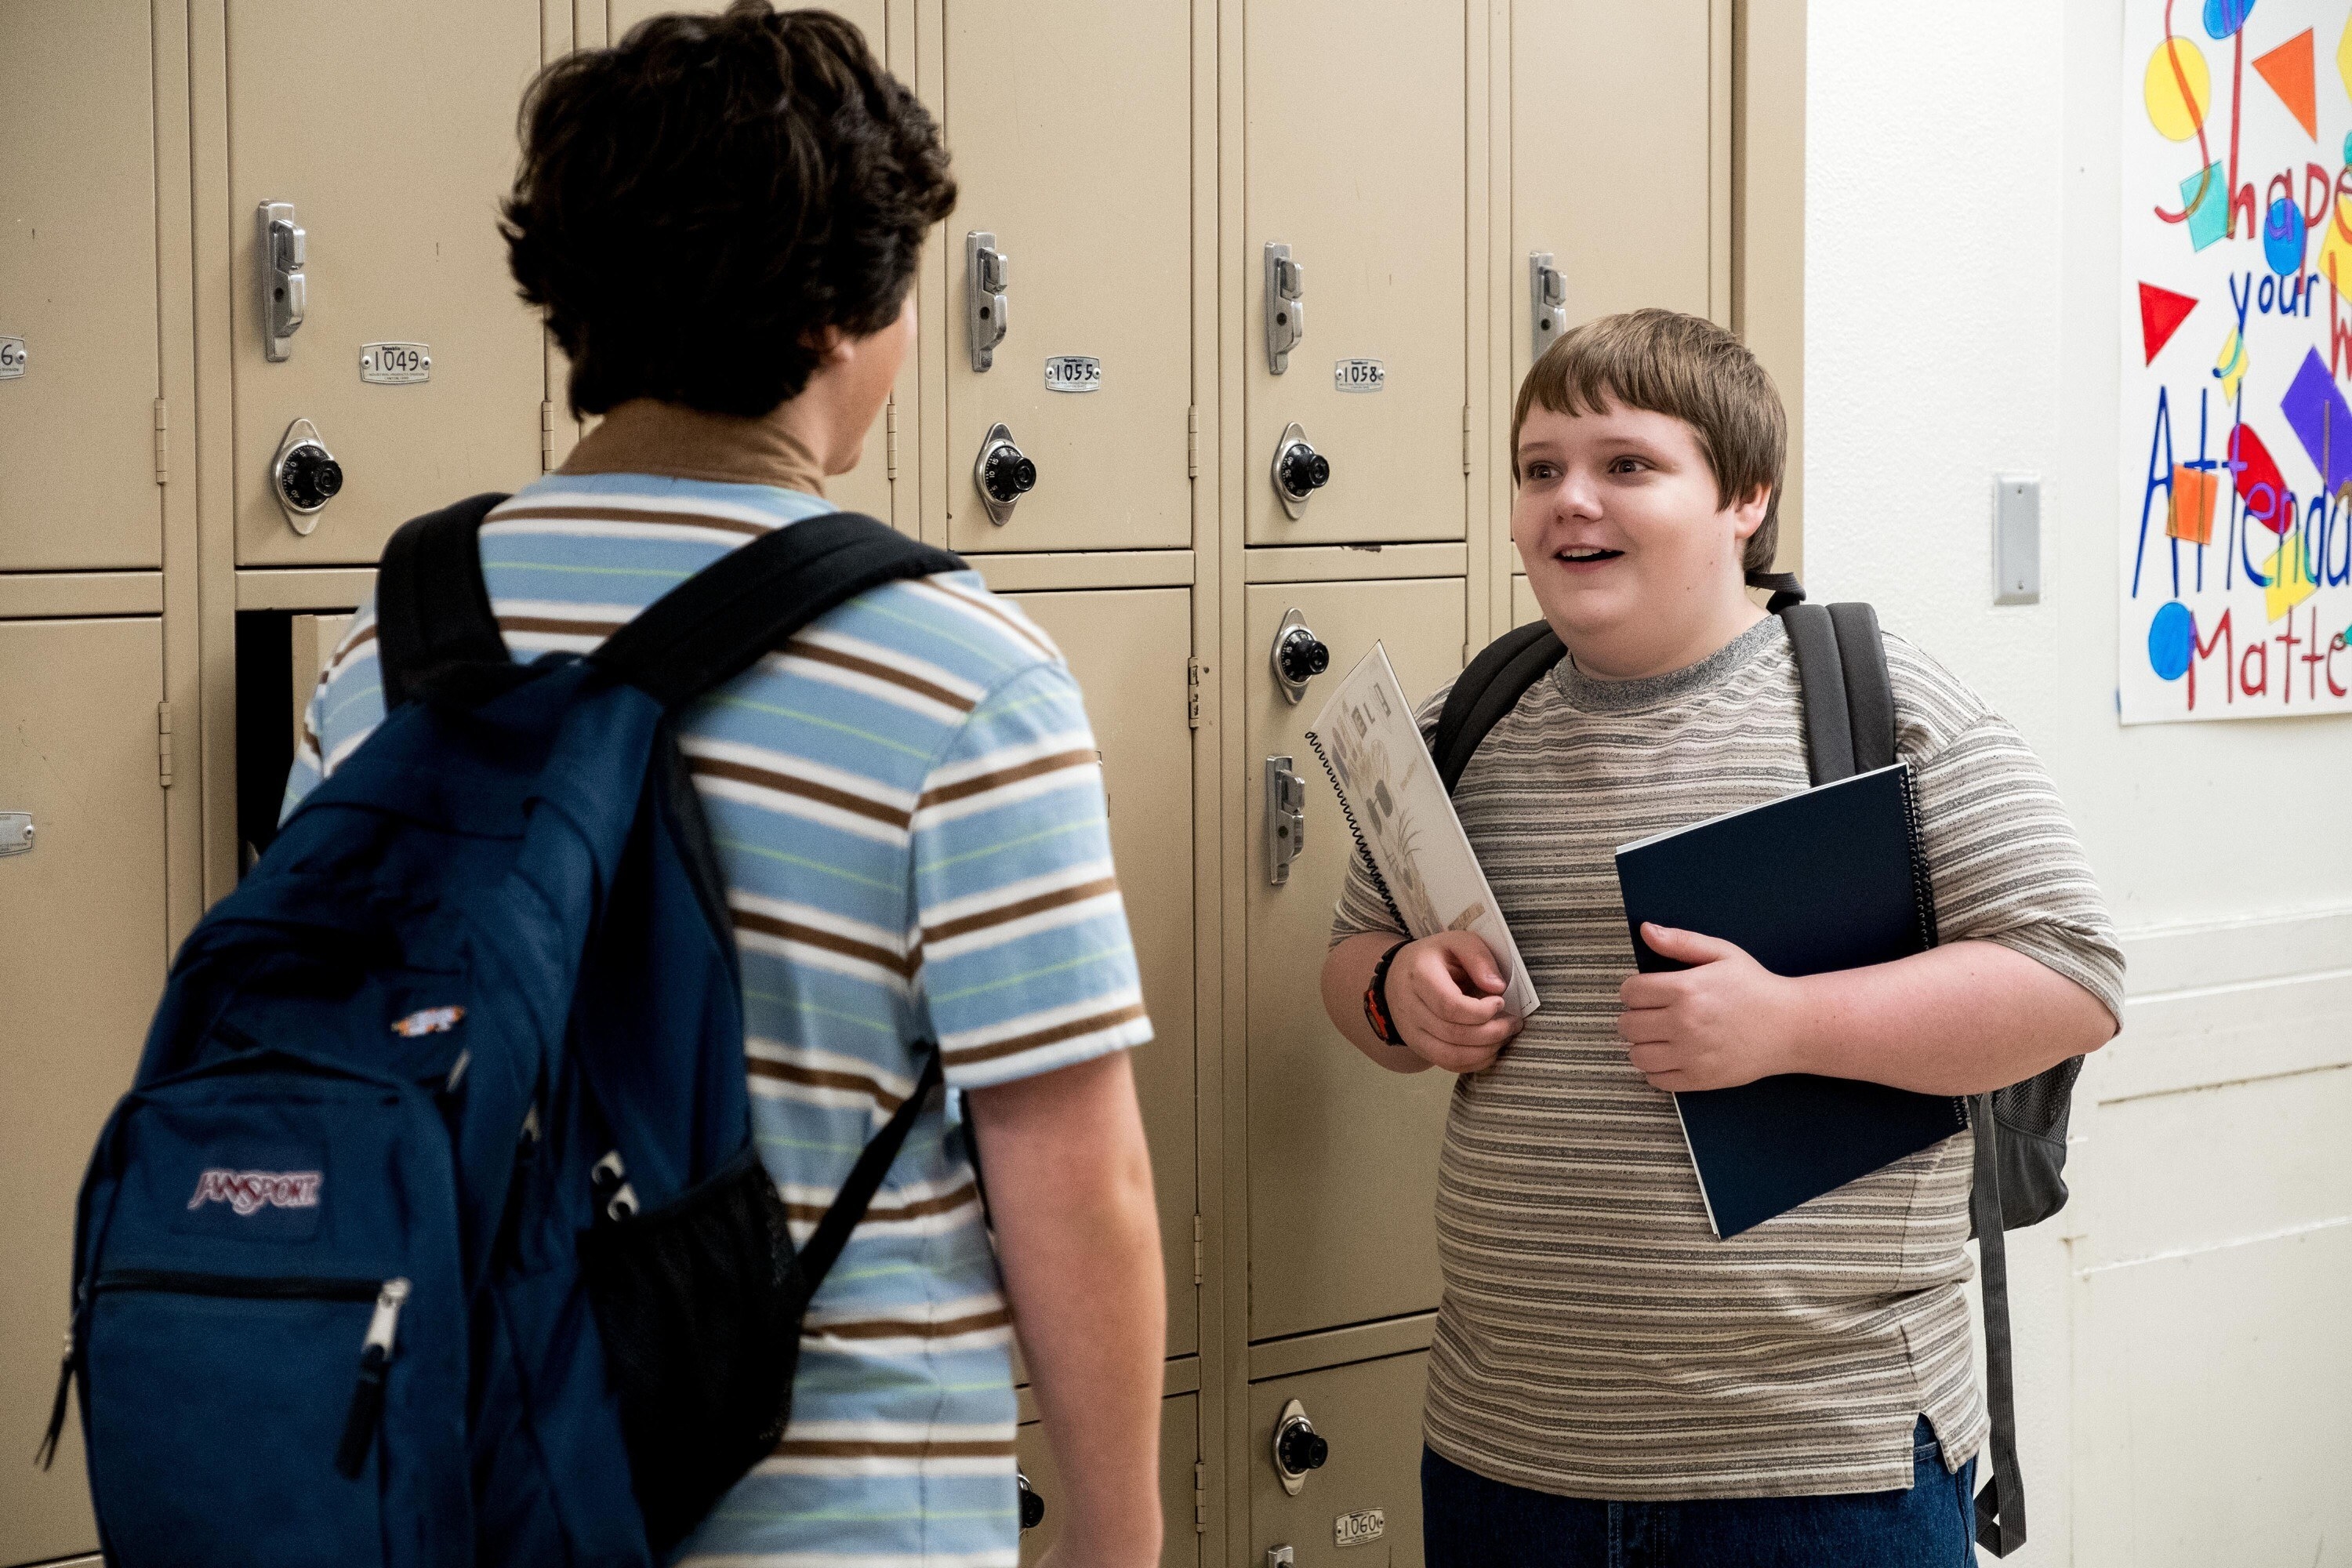 Taj Cross and Dylan Gage talk to each other next to their lockers